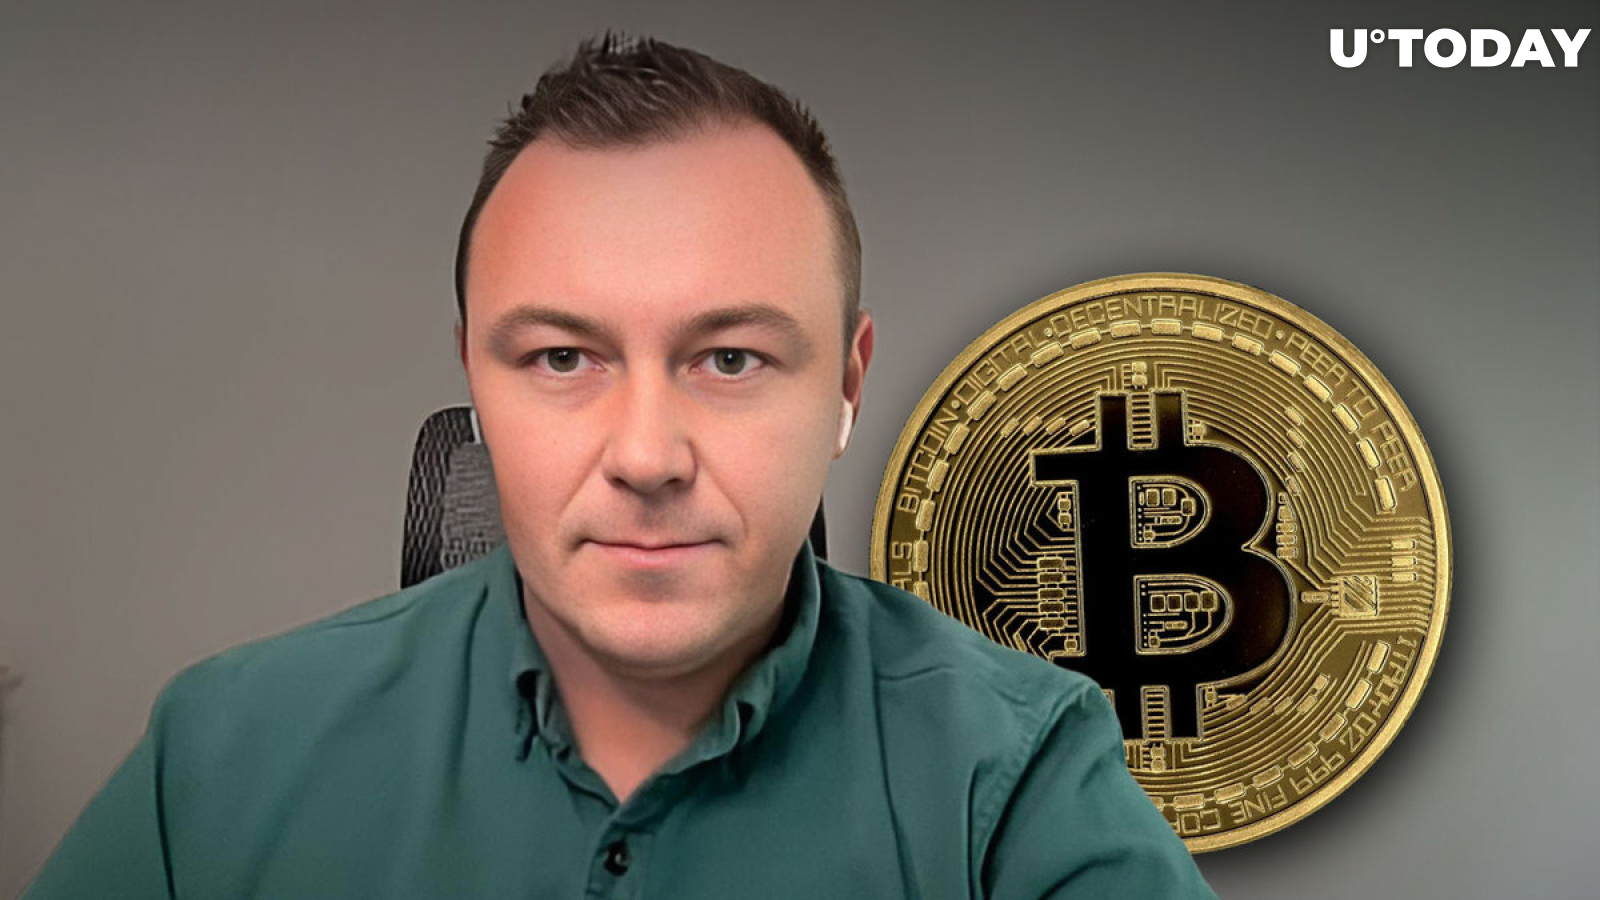 Bitcoin ETF Is Not Most Important Adoption Vector for BTC, Gabor Gurbacs Says